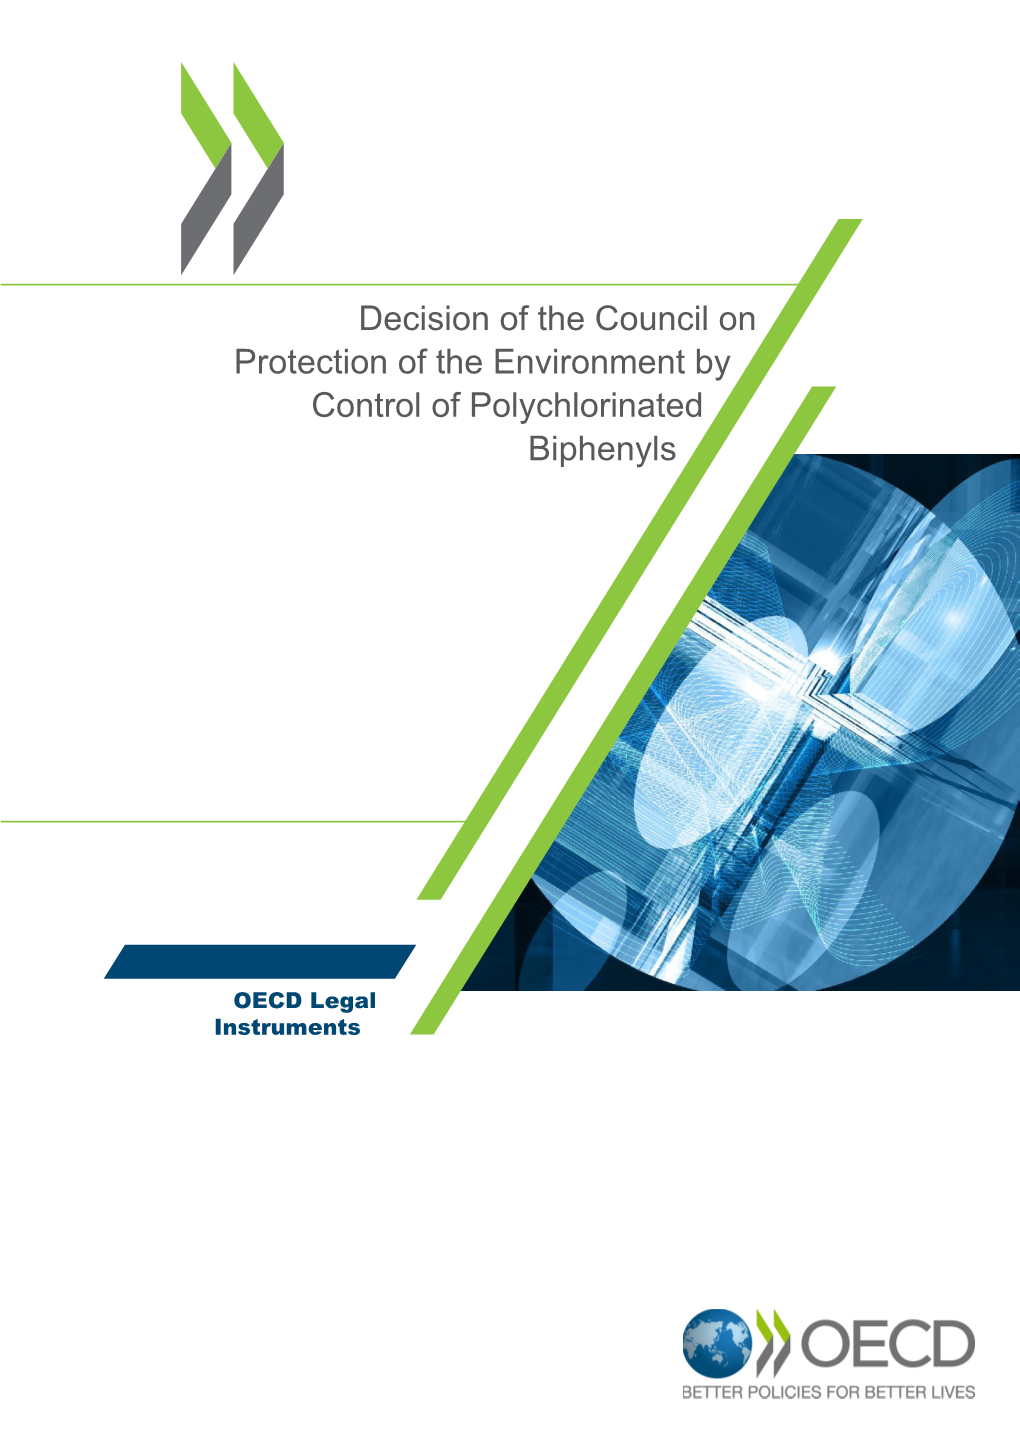 Decision of the Council on Protection of the Environment by Control of Polychlorinated Biphenyls